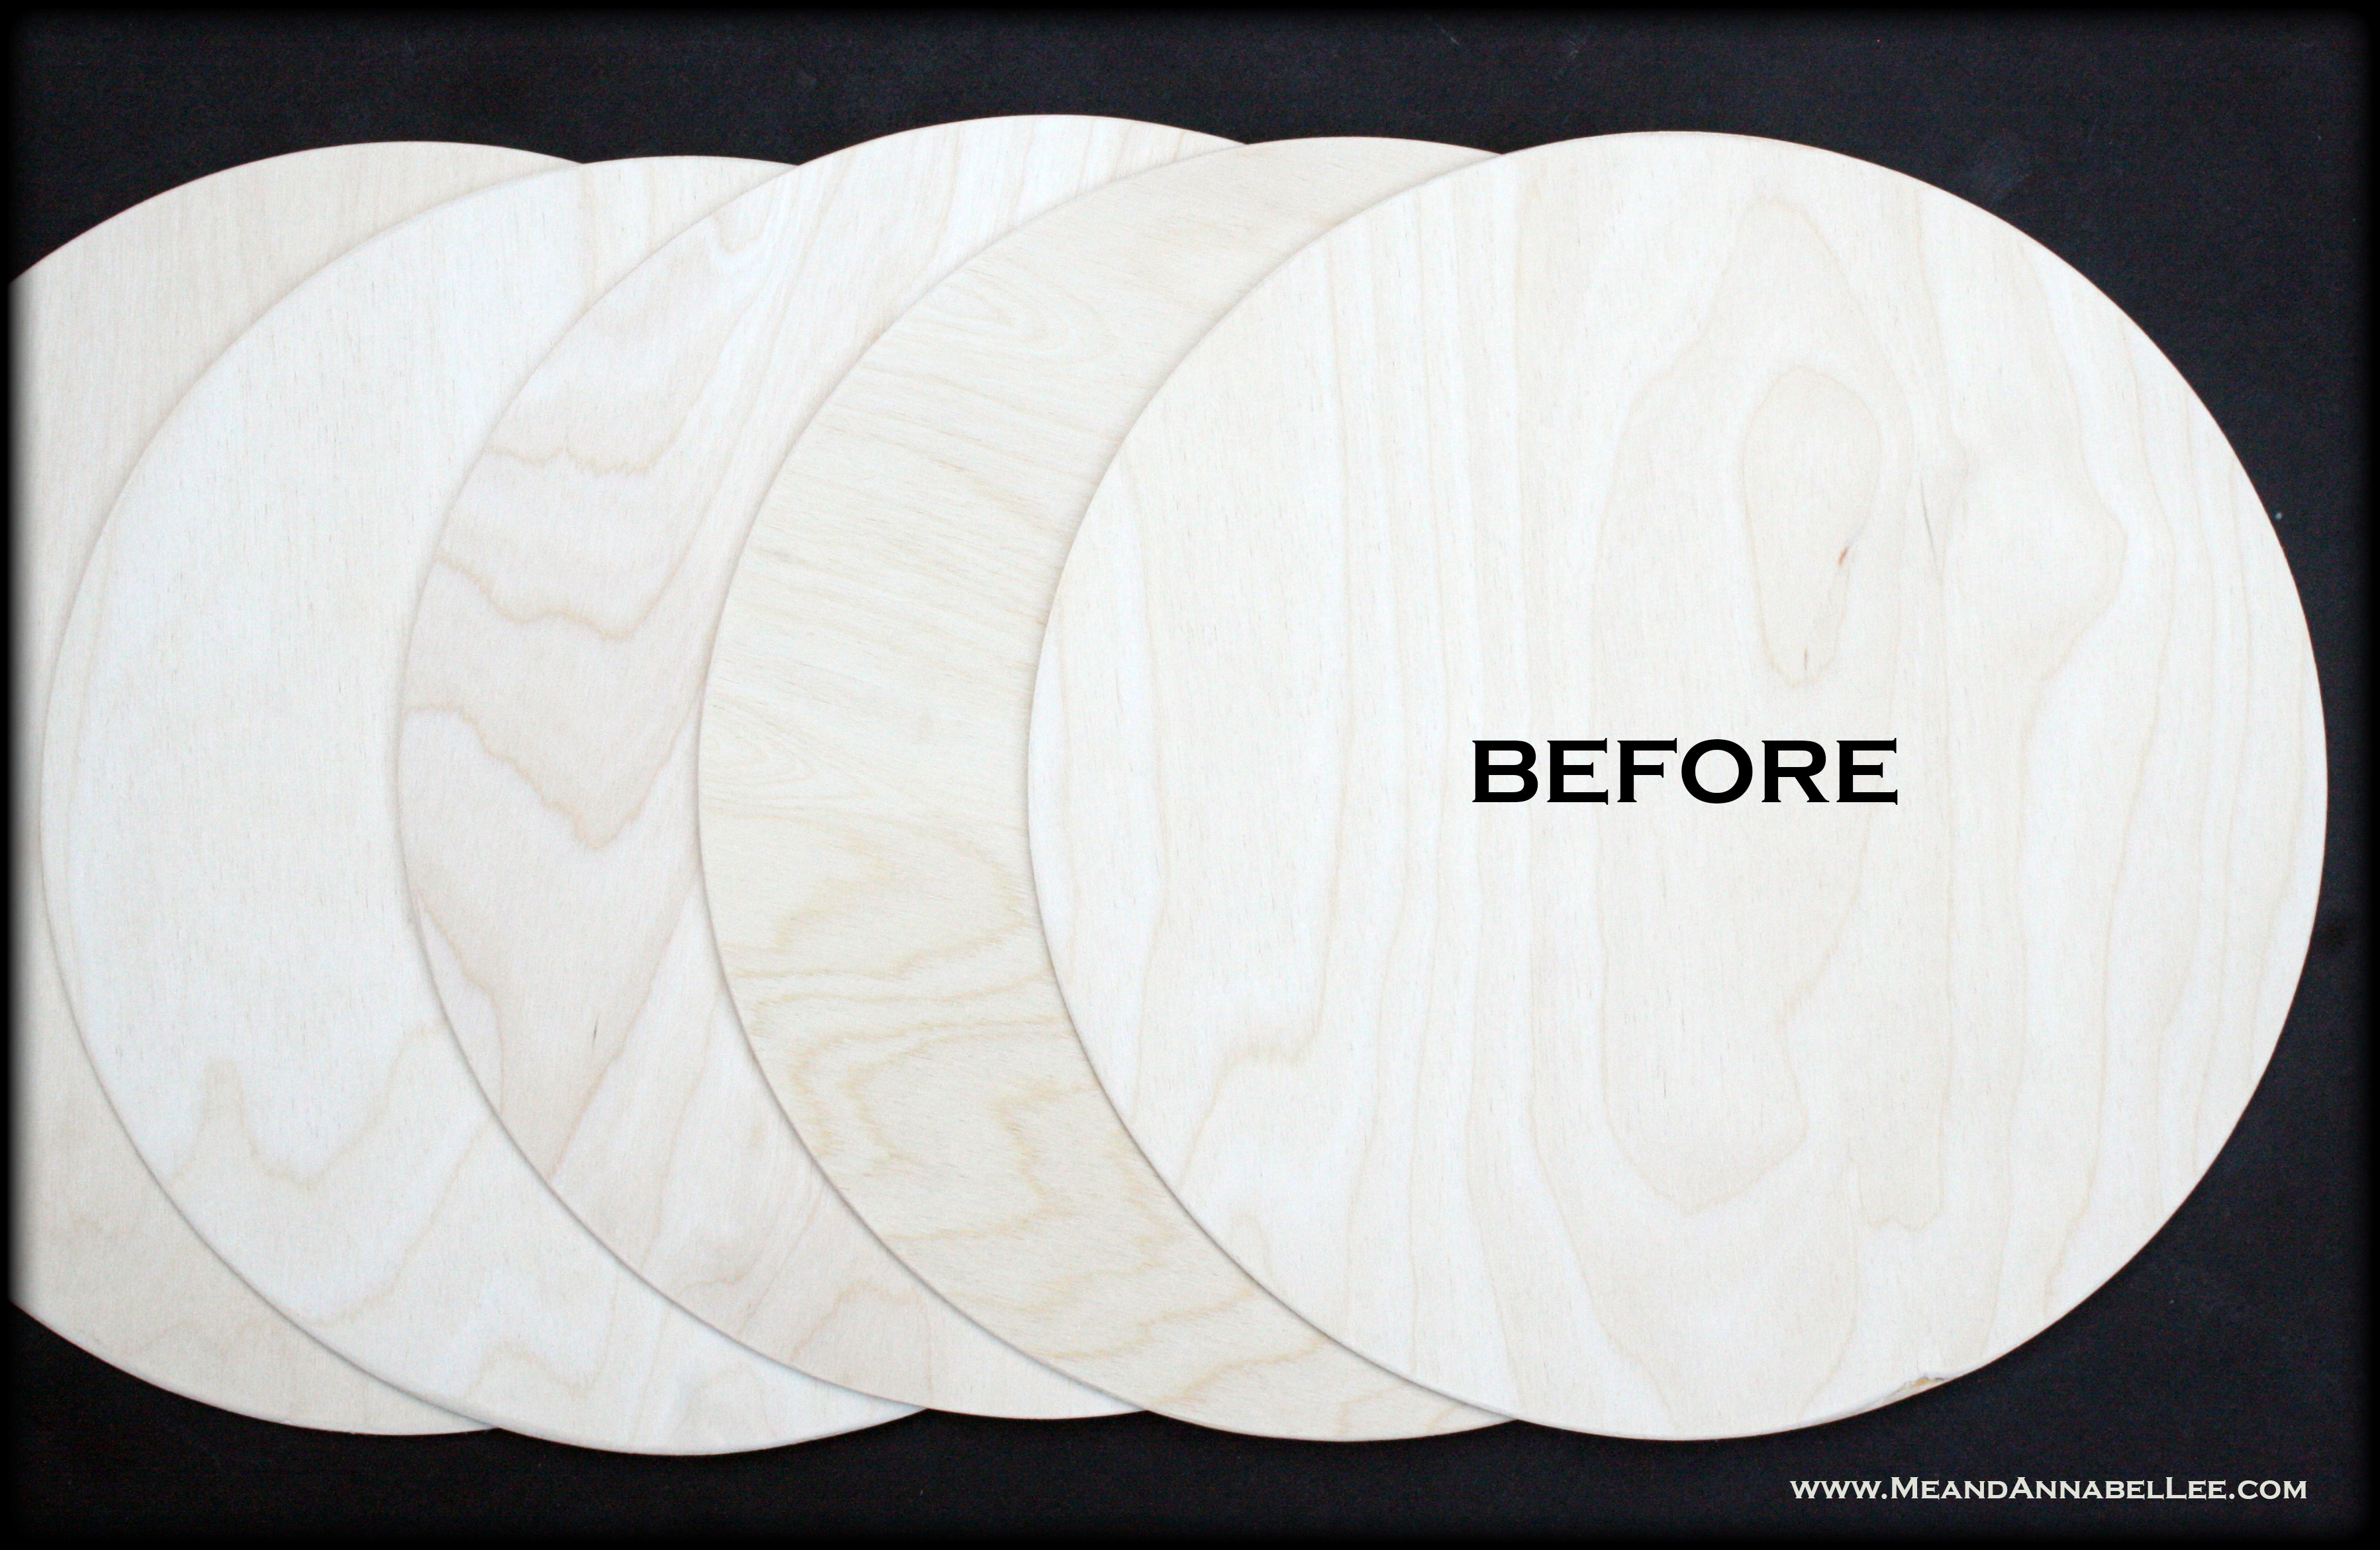 Use Wooden disks to create DIY Charger Plates | Halloween Crafts | www.MeandAnnabelLee.com